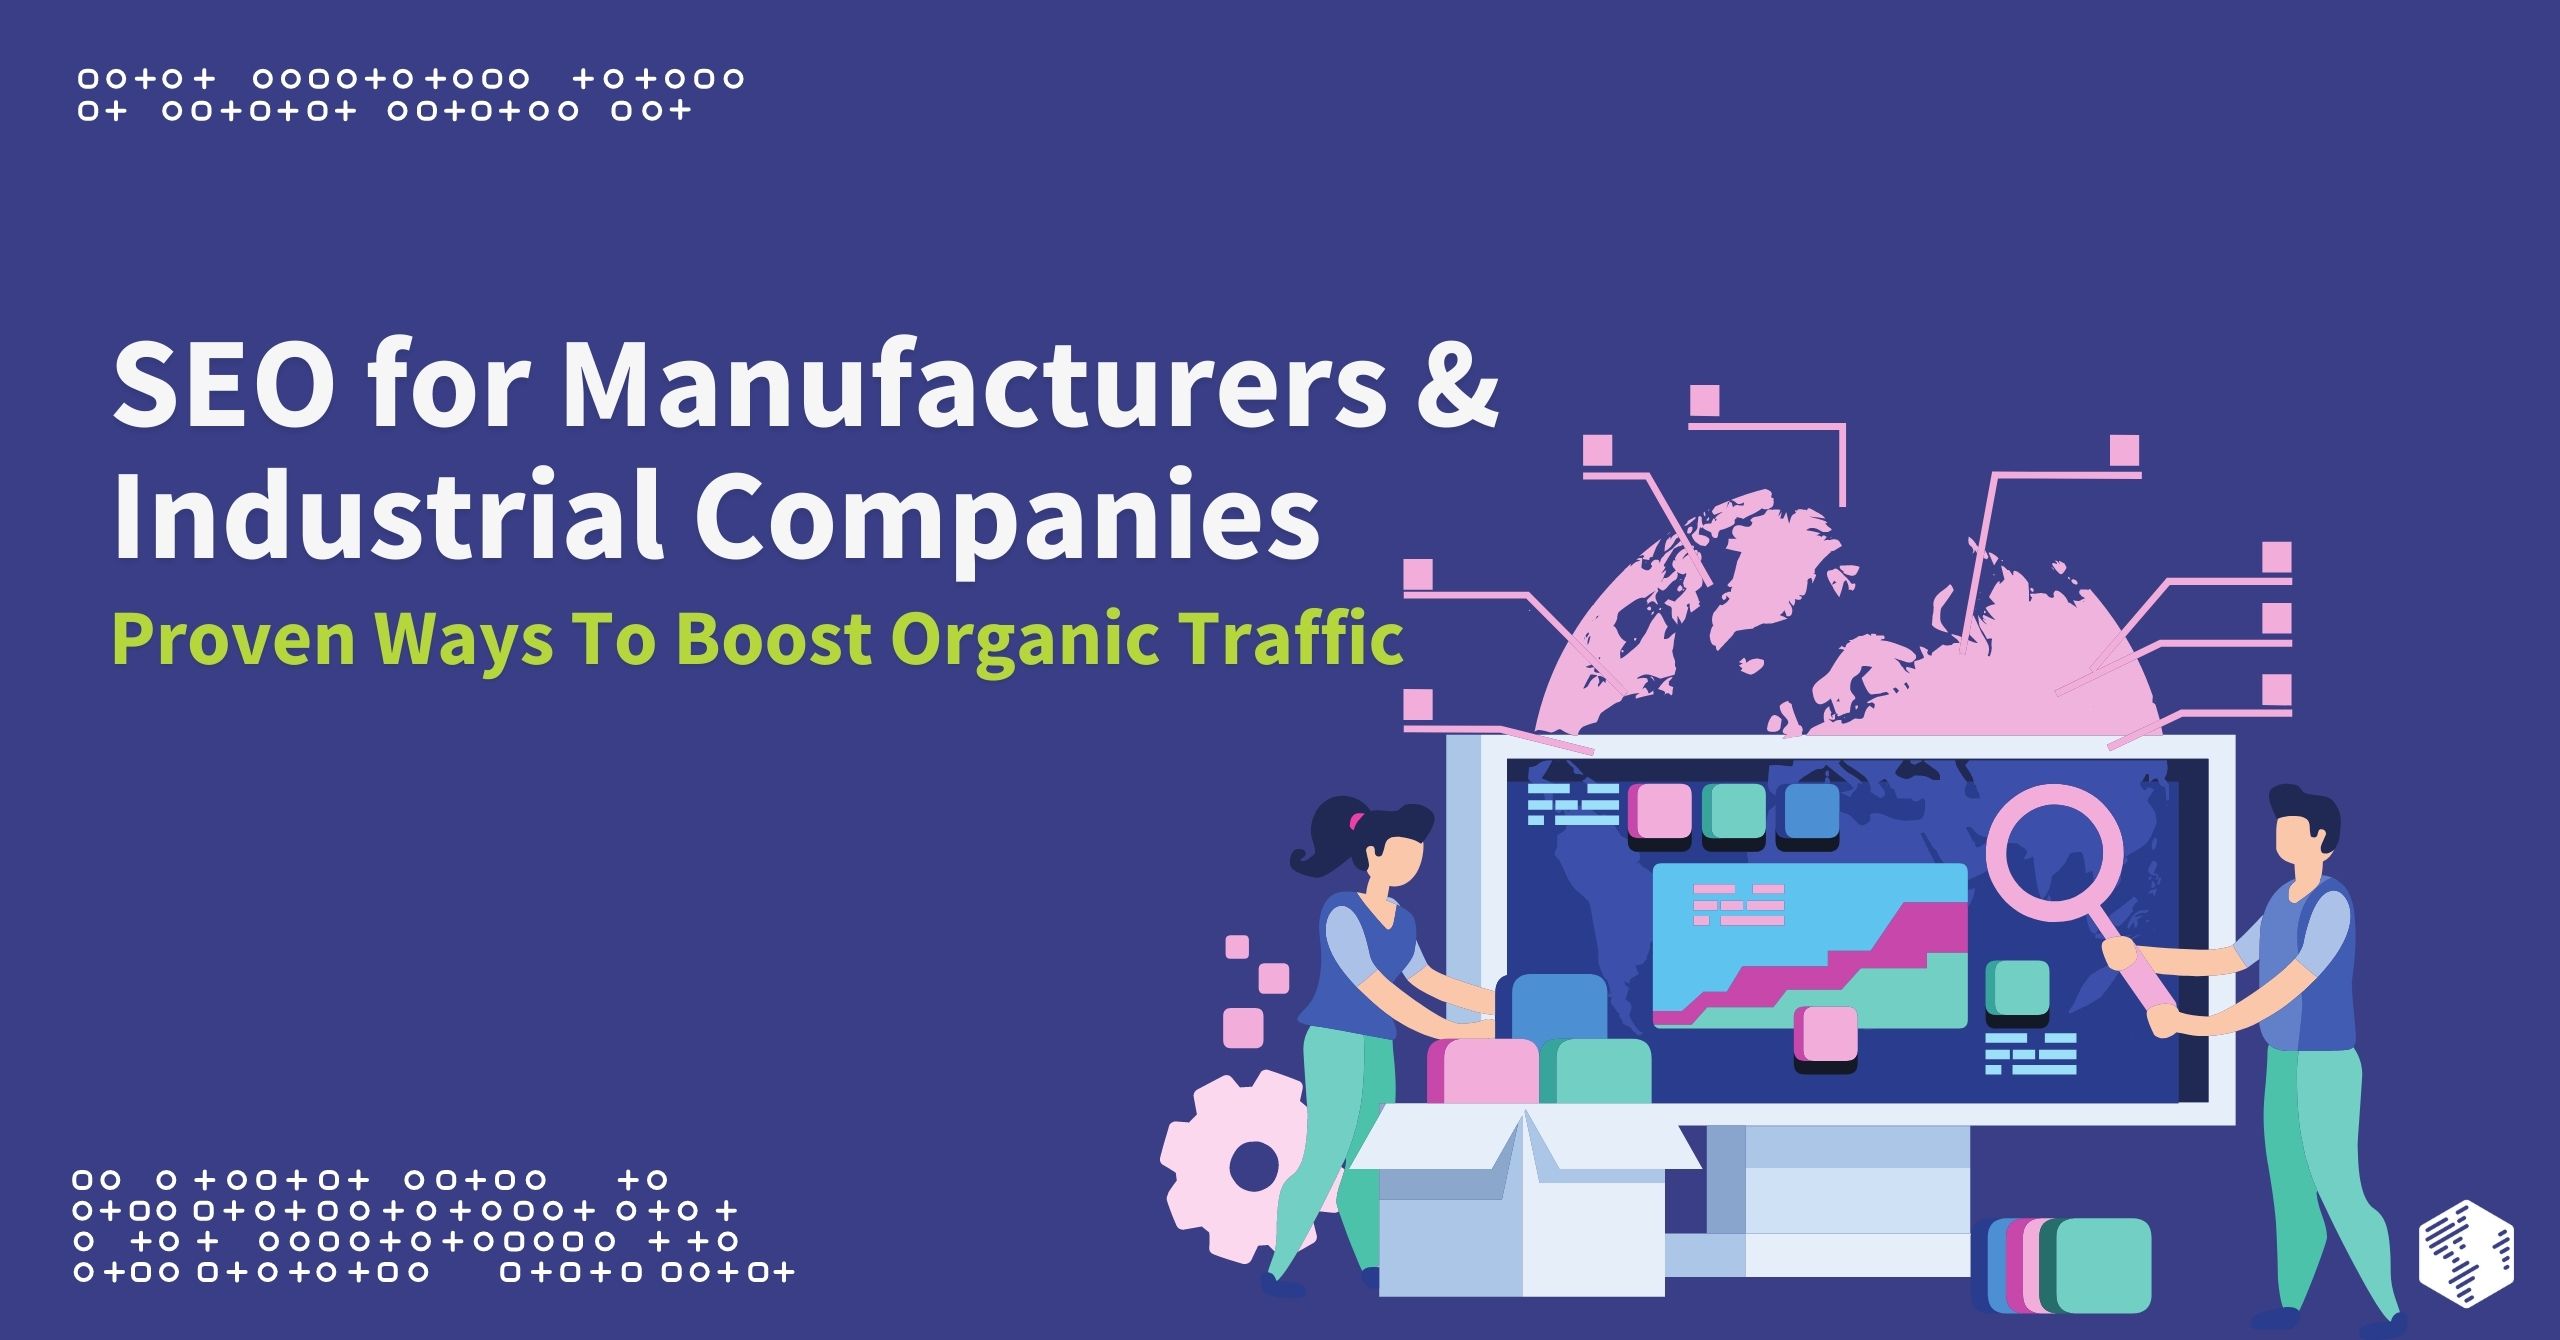 SEO for Manufacturers & Industrial Companies – Proven Ways To Boost Organic Traffic